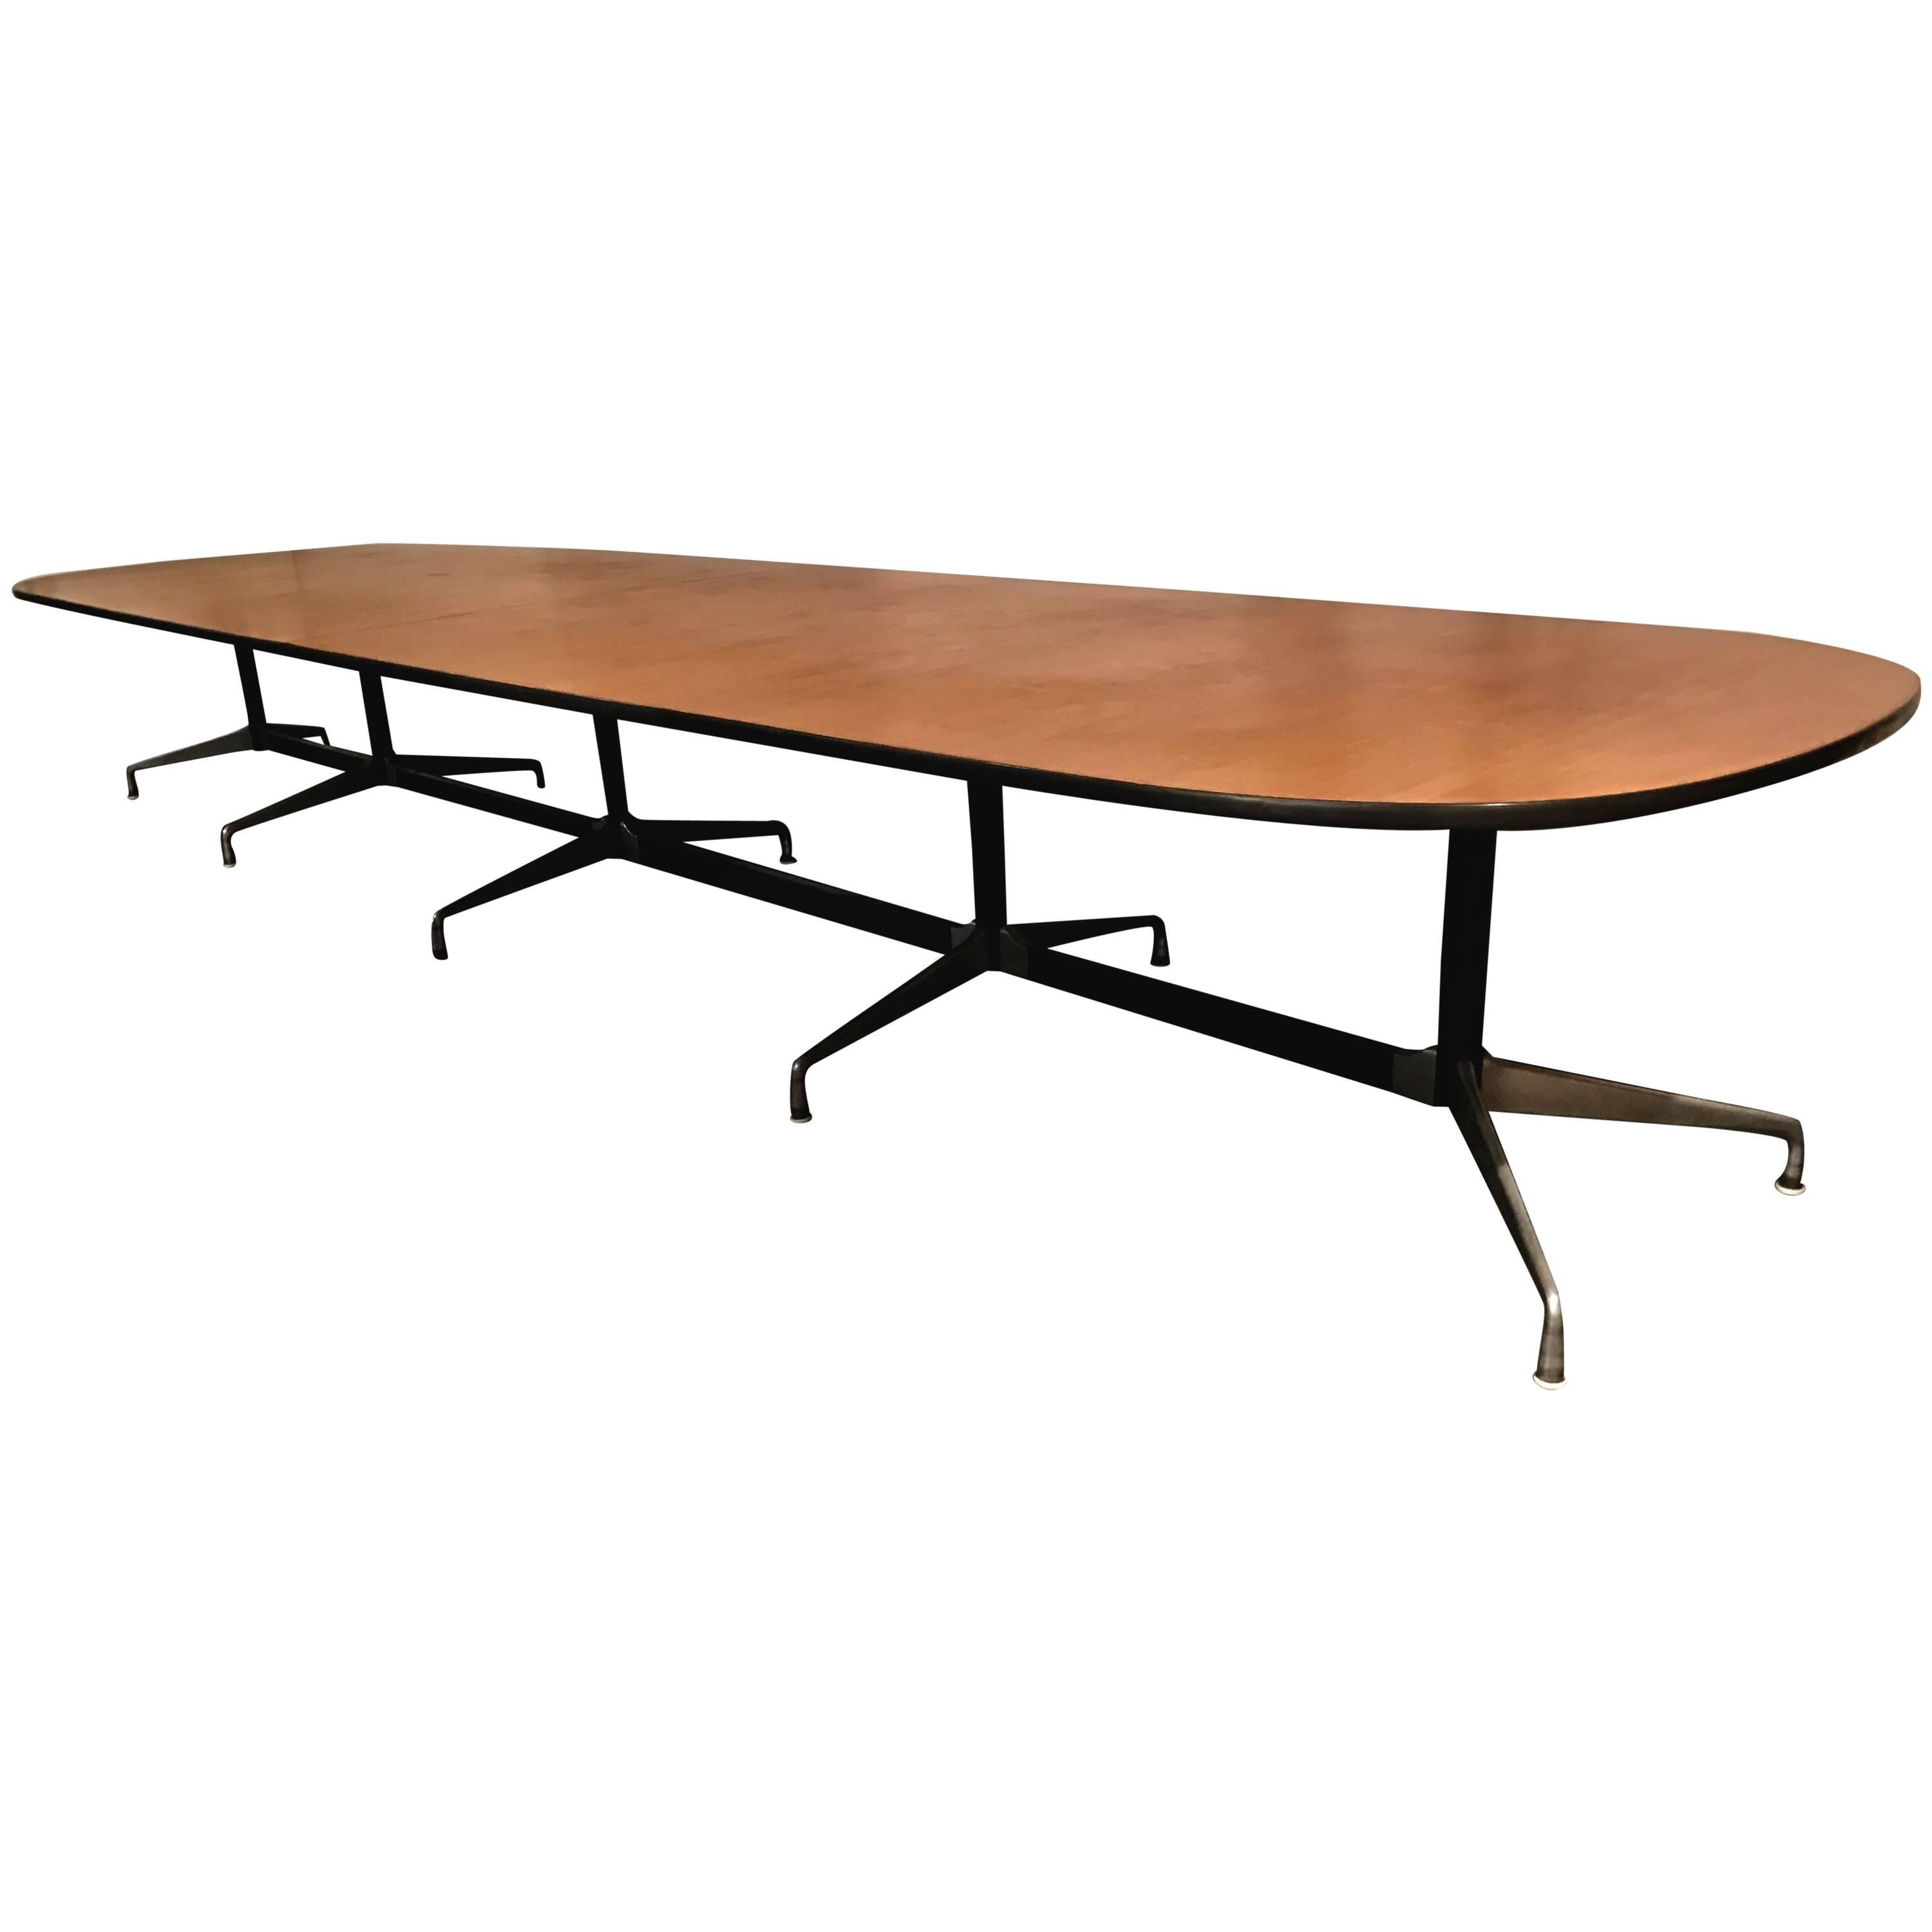 Classic Charles and Eames Aluminium Group Conference Table, Herman Miller